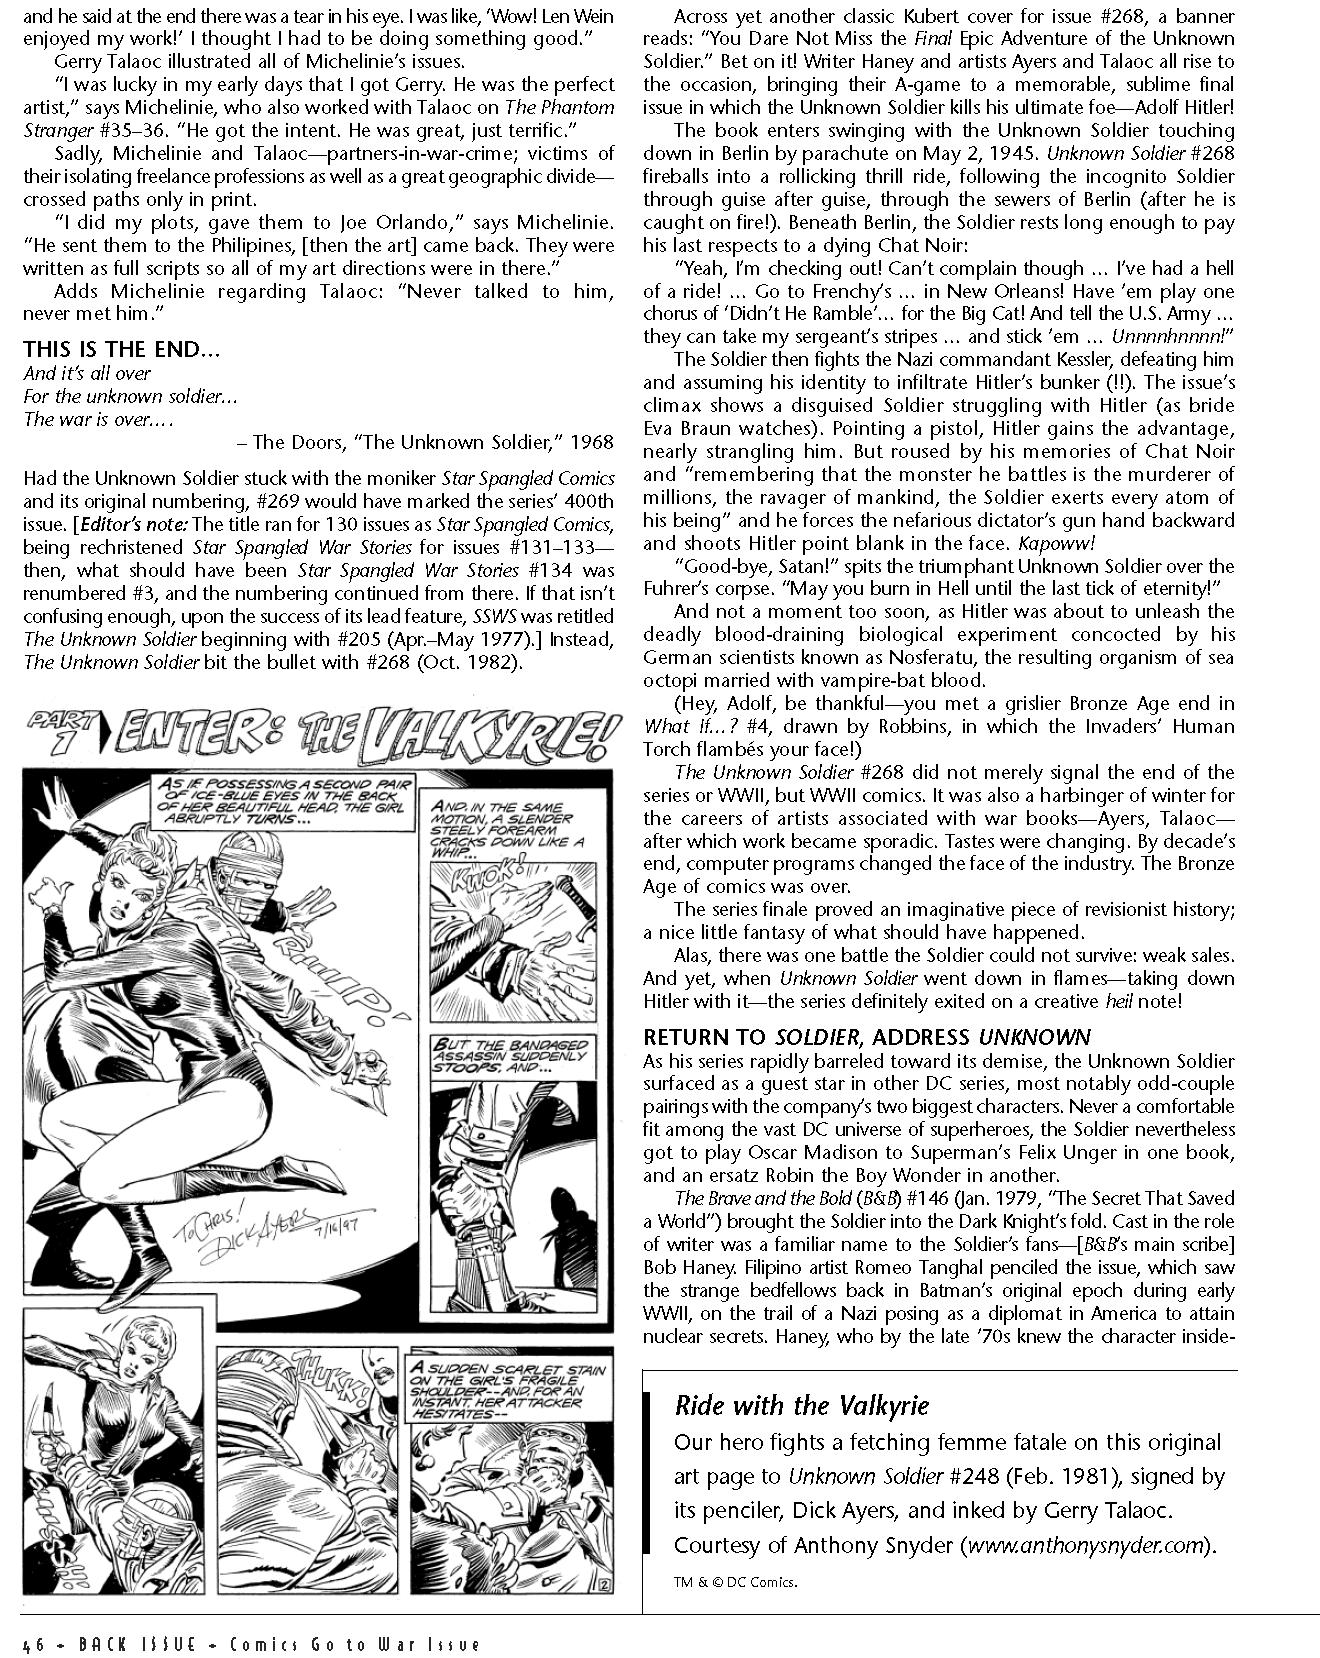 Read online Back Issue comic -  Issue #37 - 48